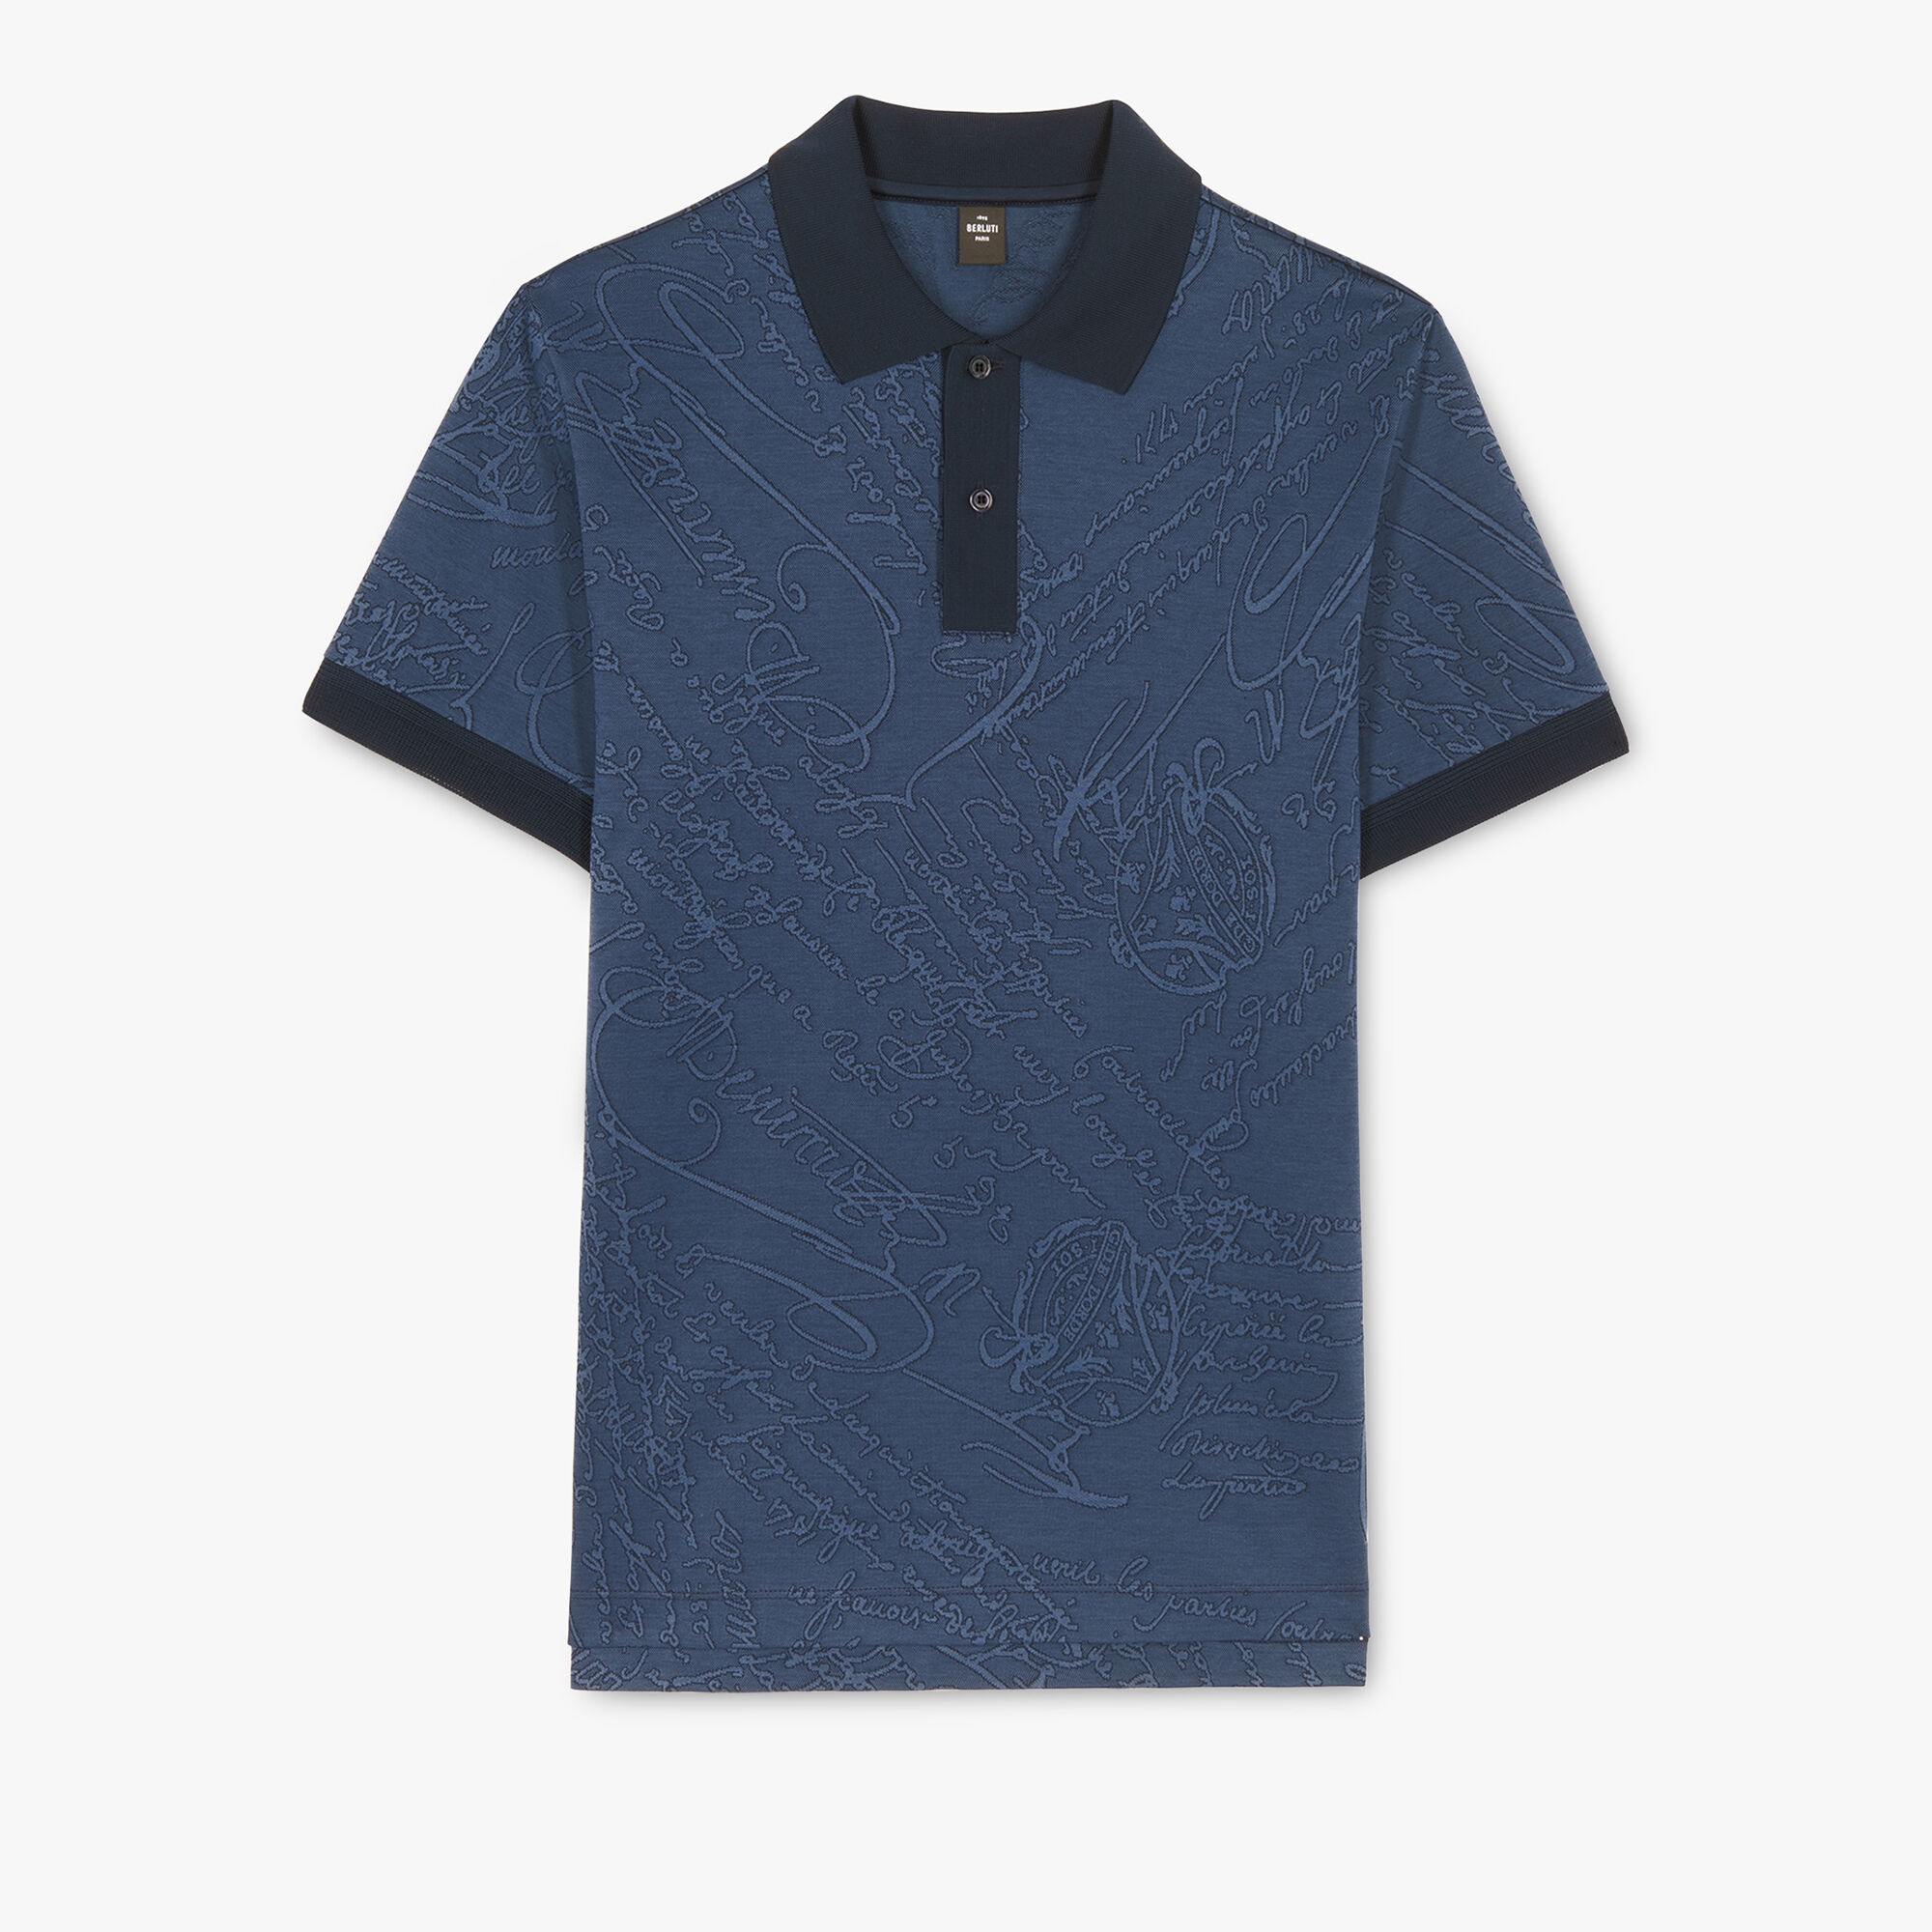 Polo and Tshirt collections by Berluti